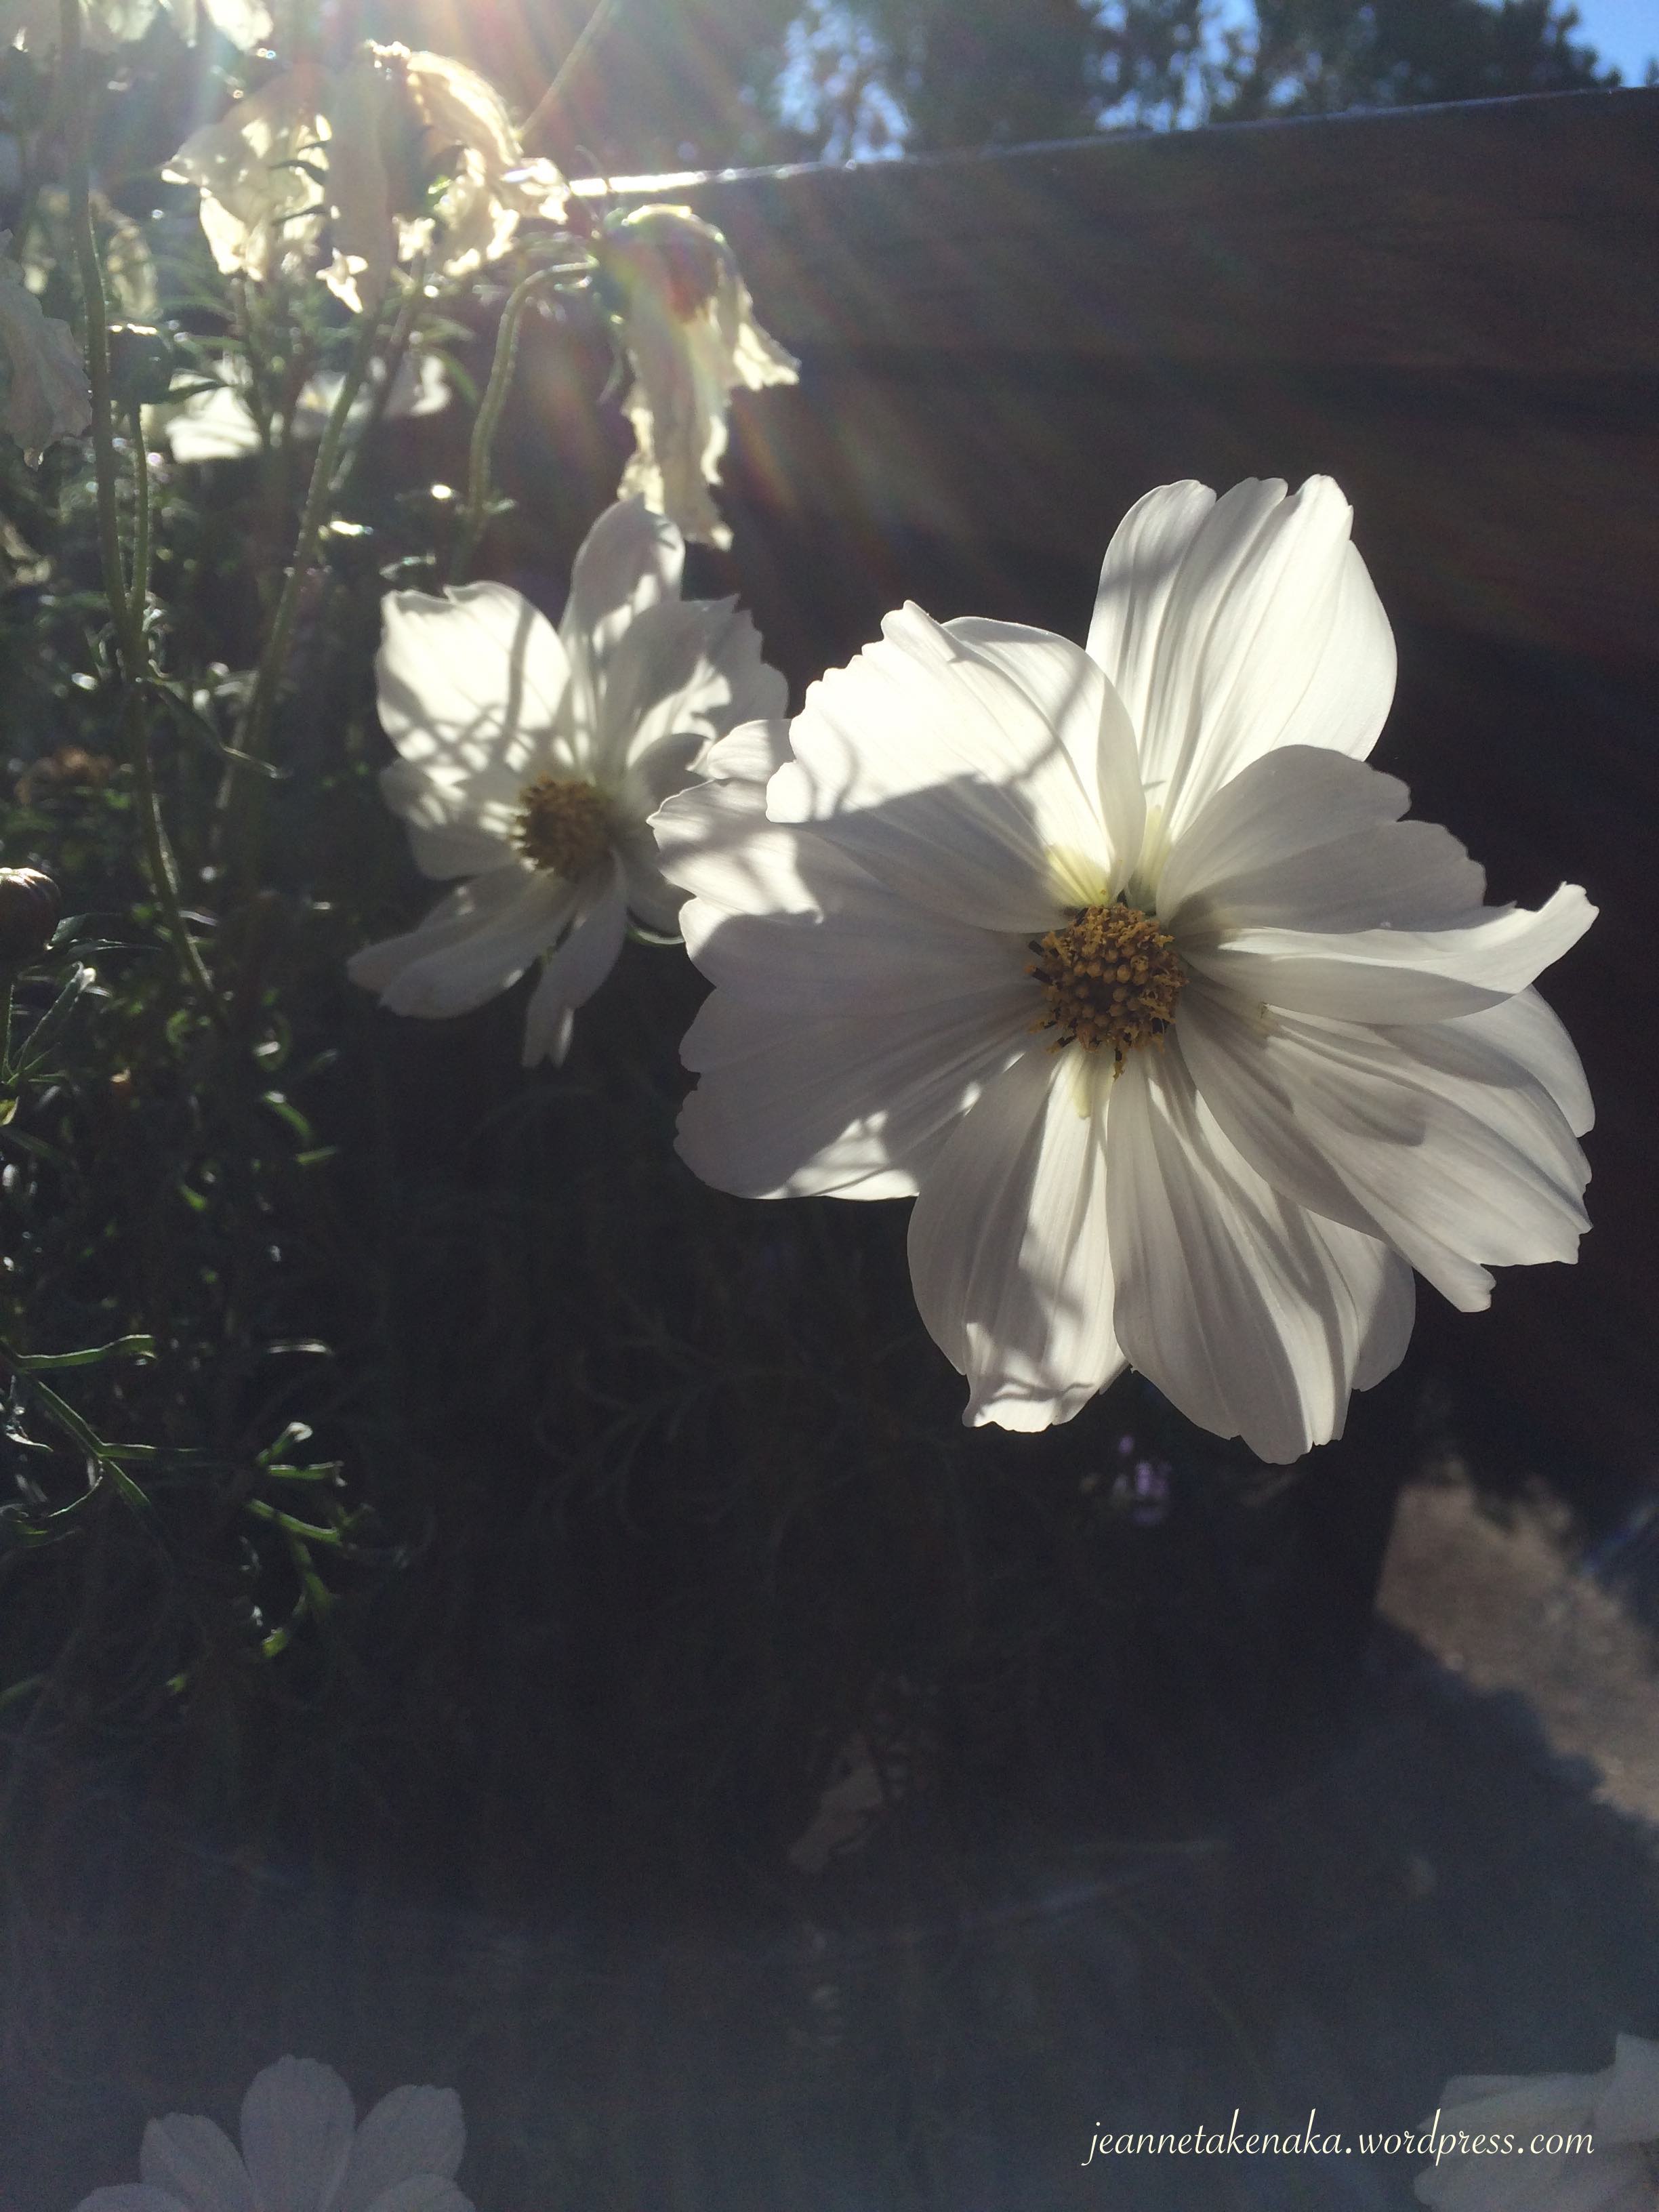 White flowers with the sun shining behind them